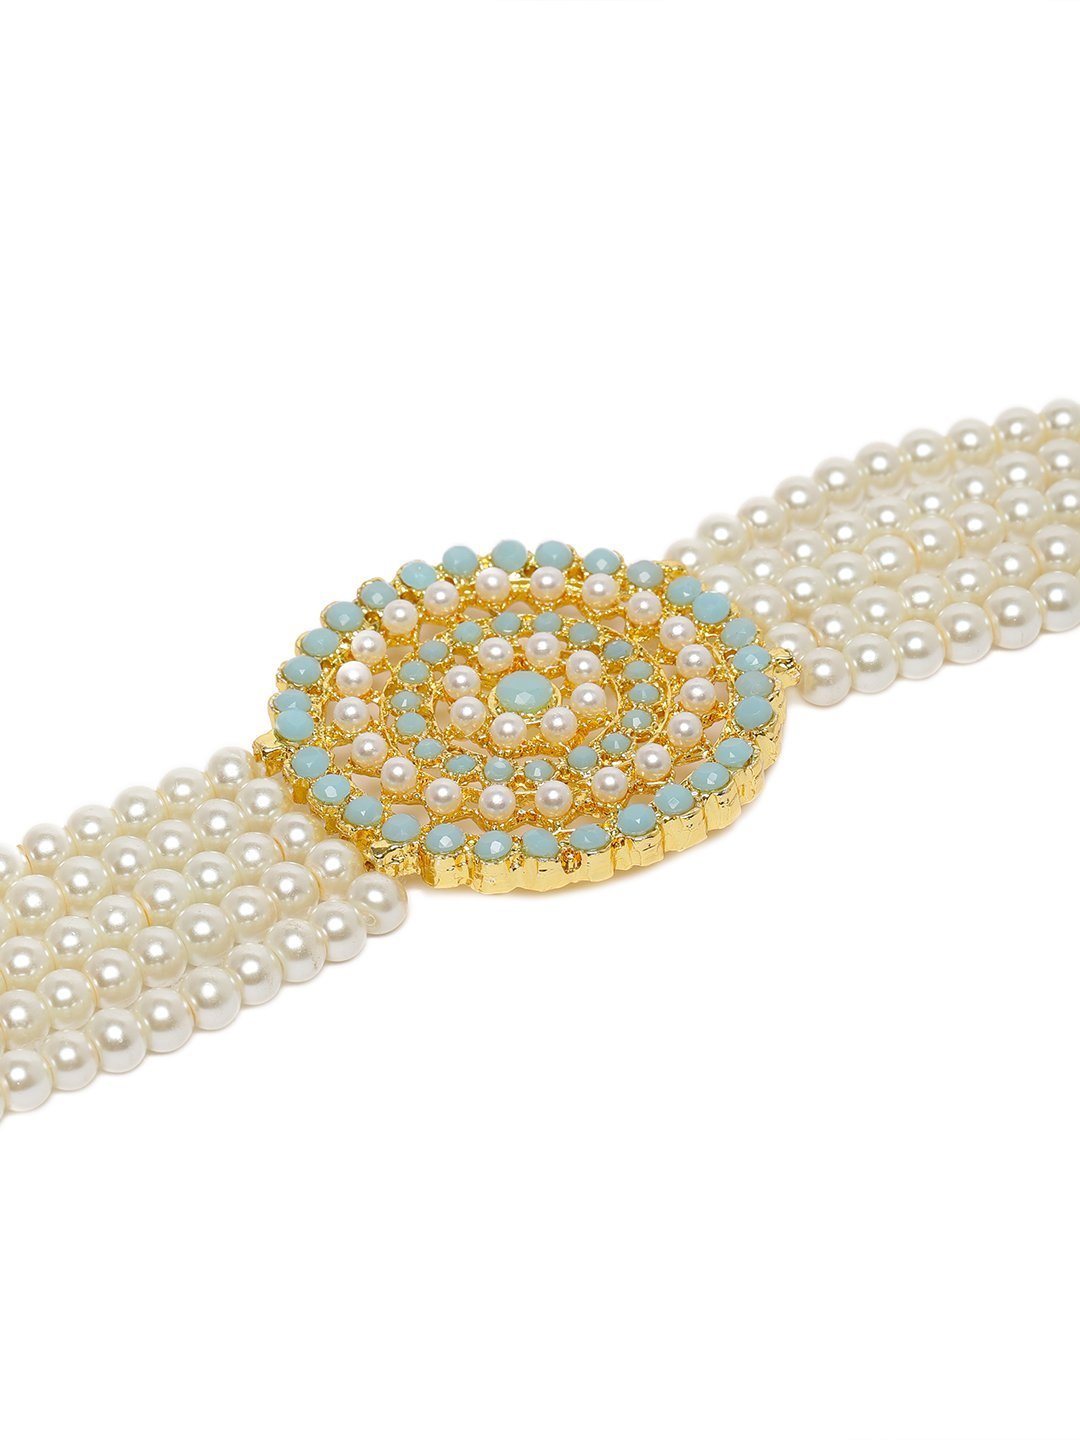 Women's Gold Plated Turquoise Light Weight Pearl Beaded Choker Necklace Set - i jewels